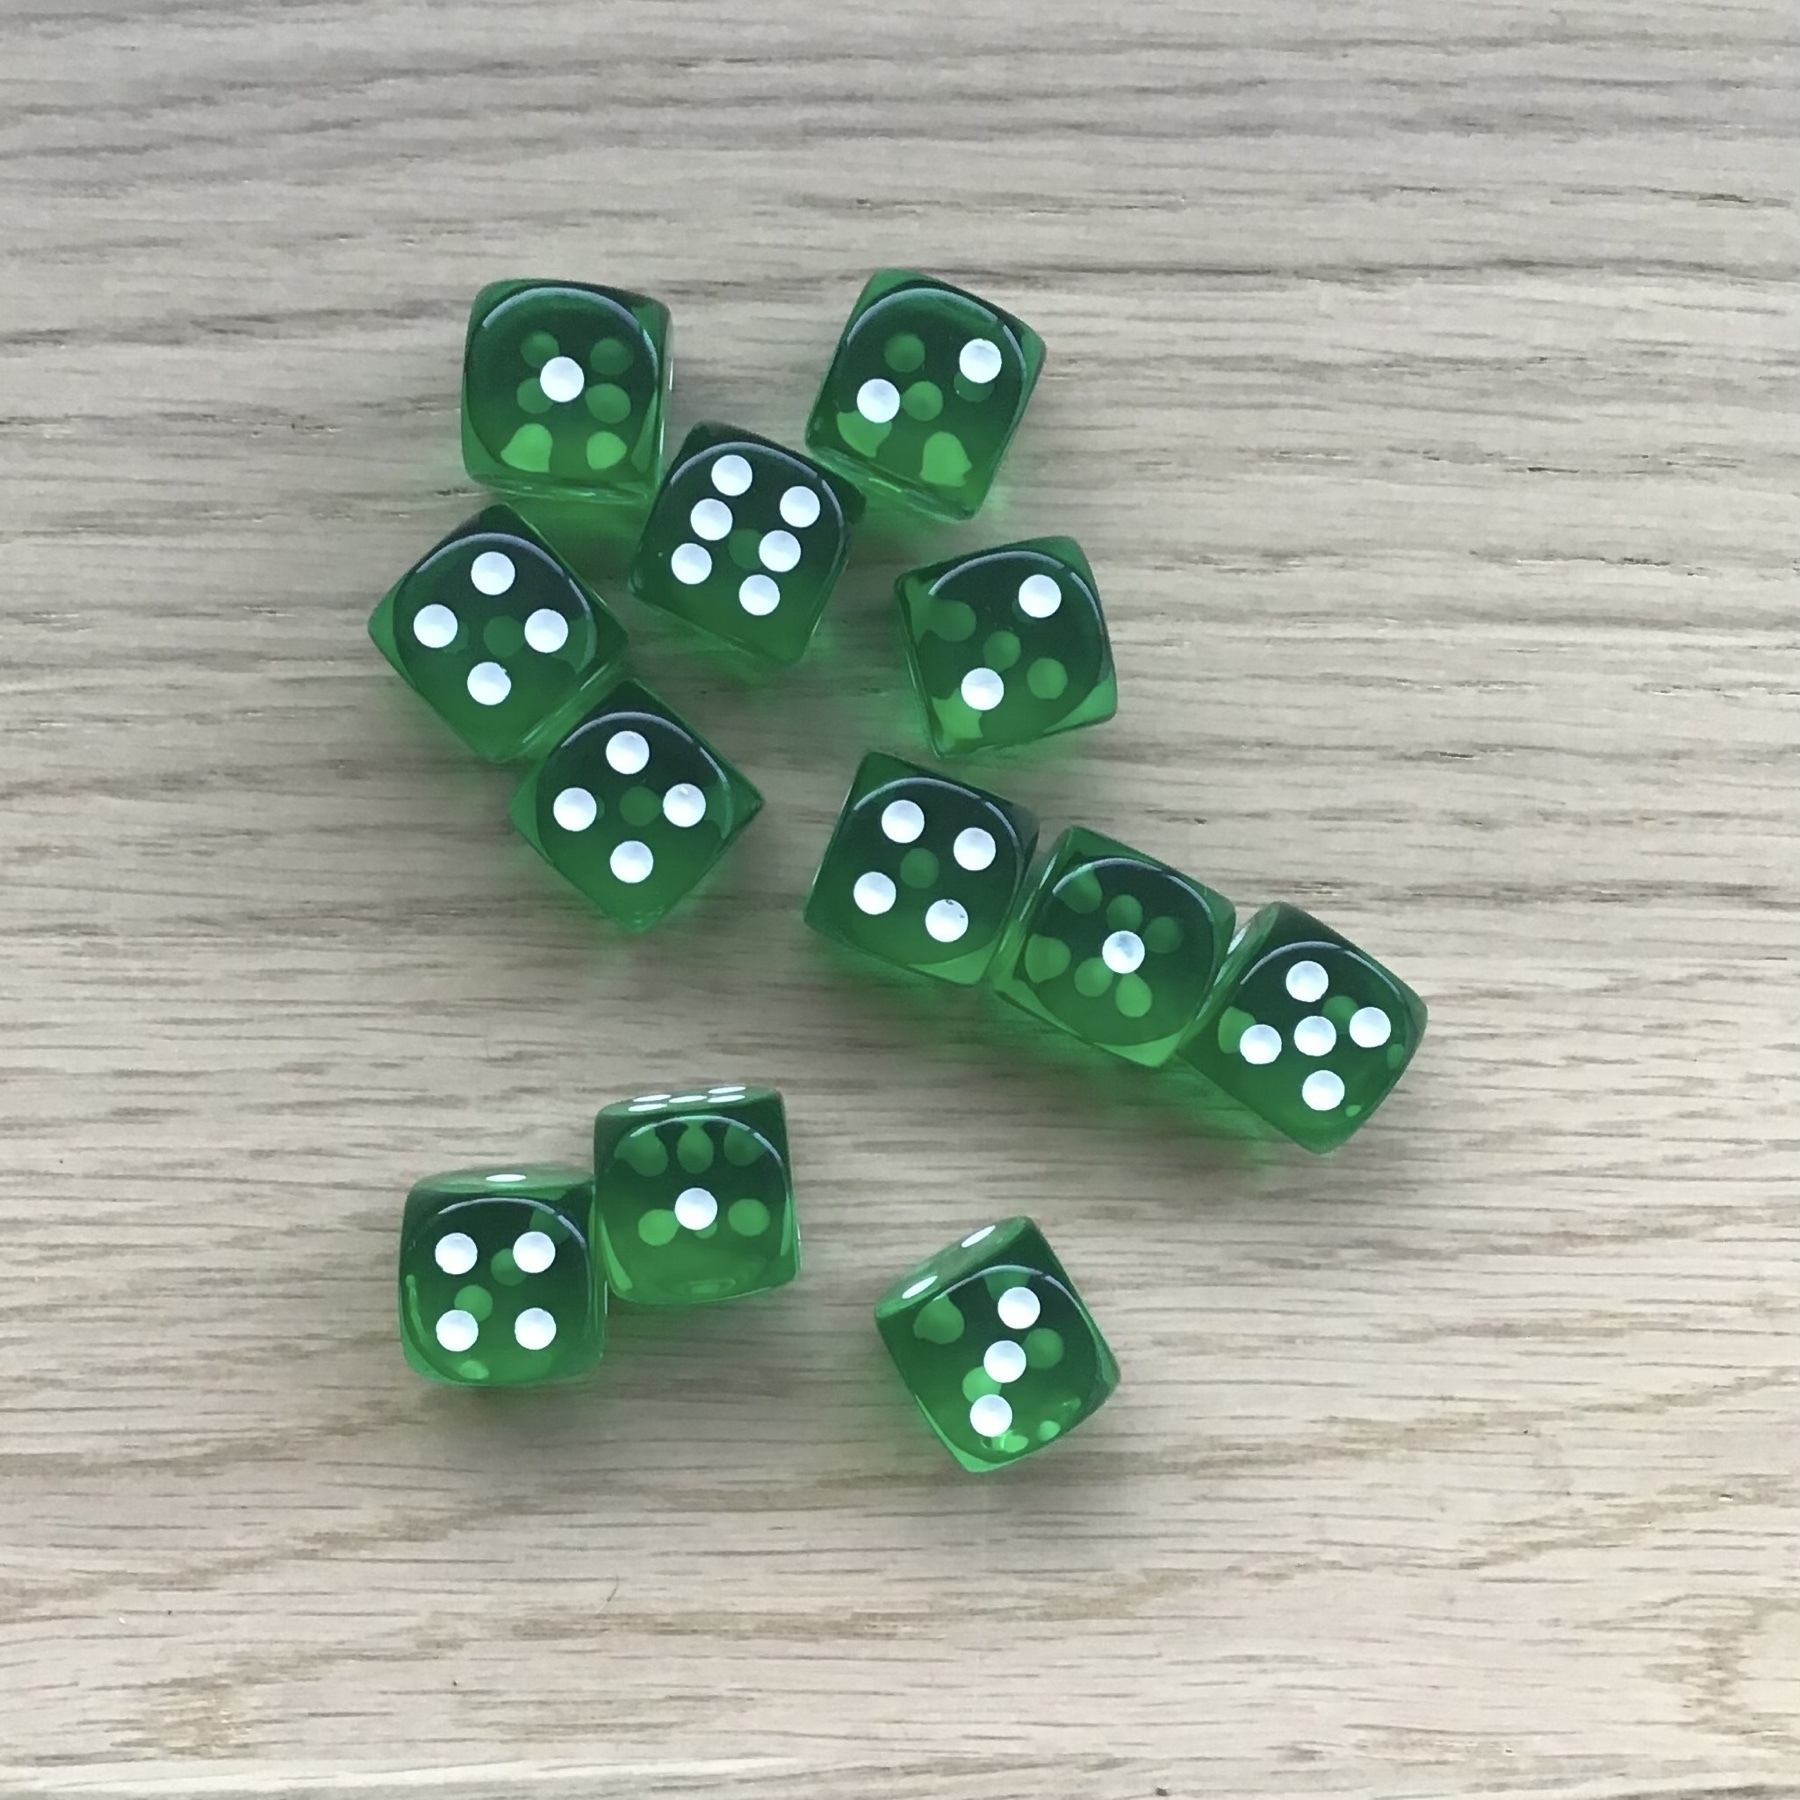 Twelve green six-sided dice on a wooden surface.